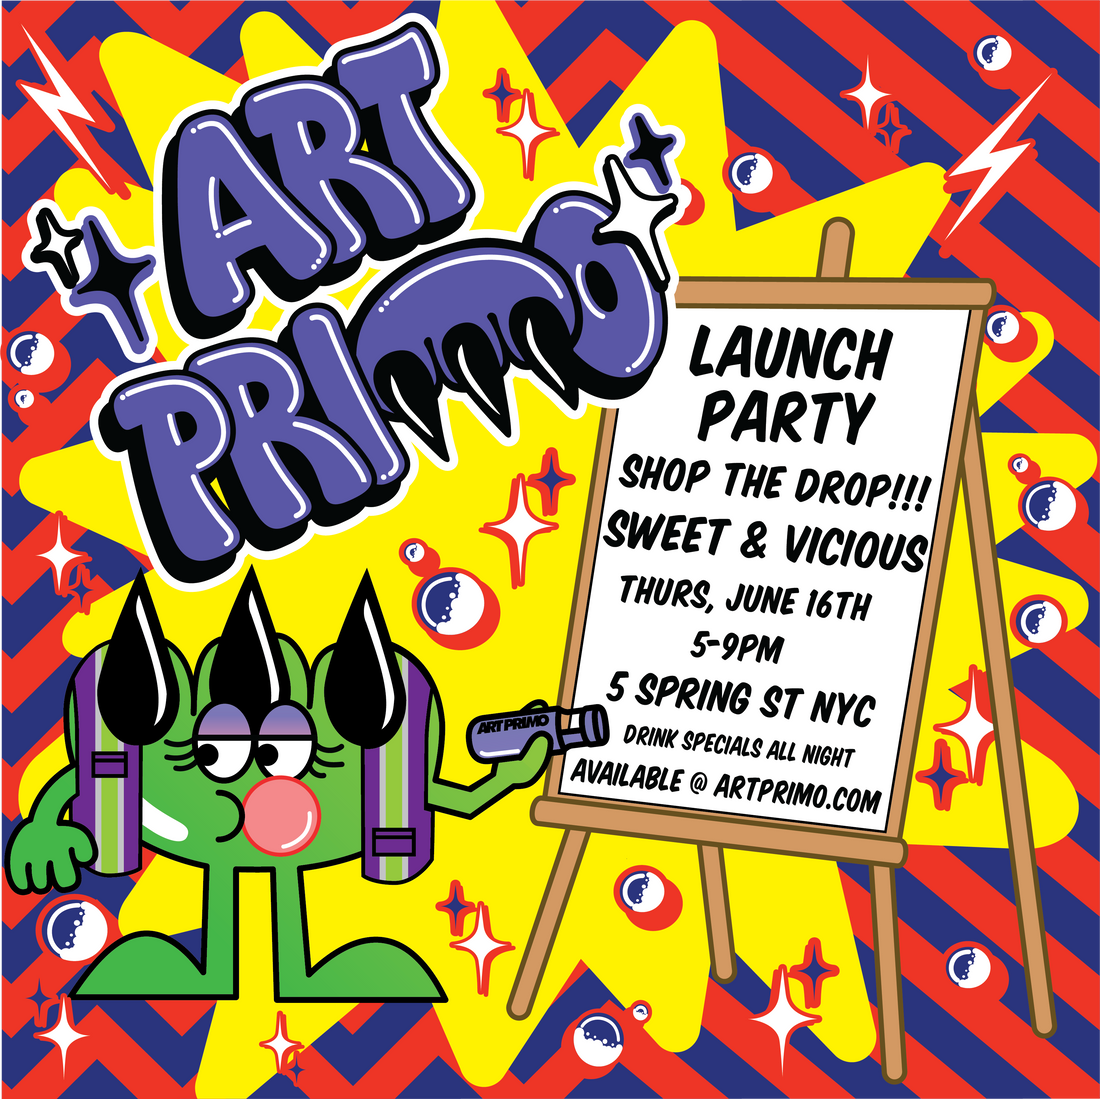 📛🎨💥🎉 CLAW20 X ART PRIMO AT SWEET & VICIOUS! 5 SPRING ST NYC - THURSDAY, JUNE 16TH. 😎🌇🗽📹